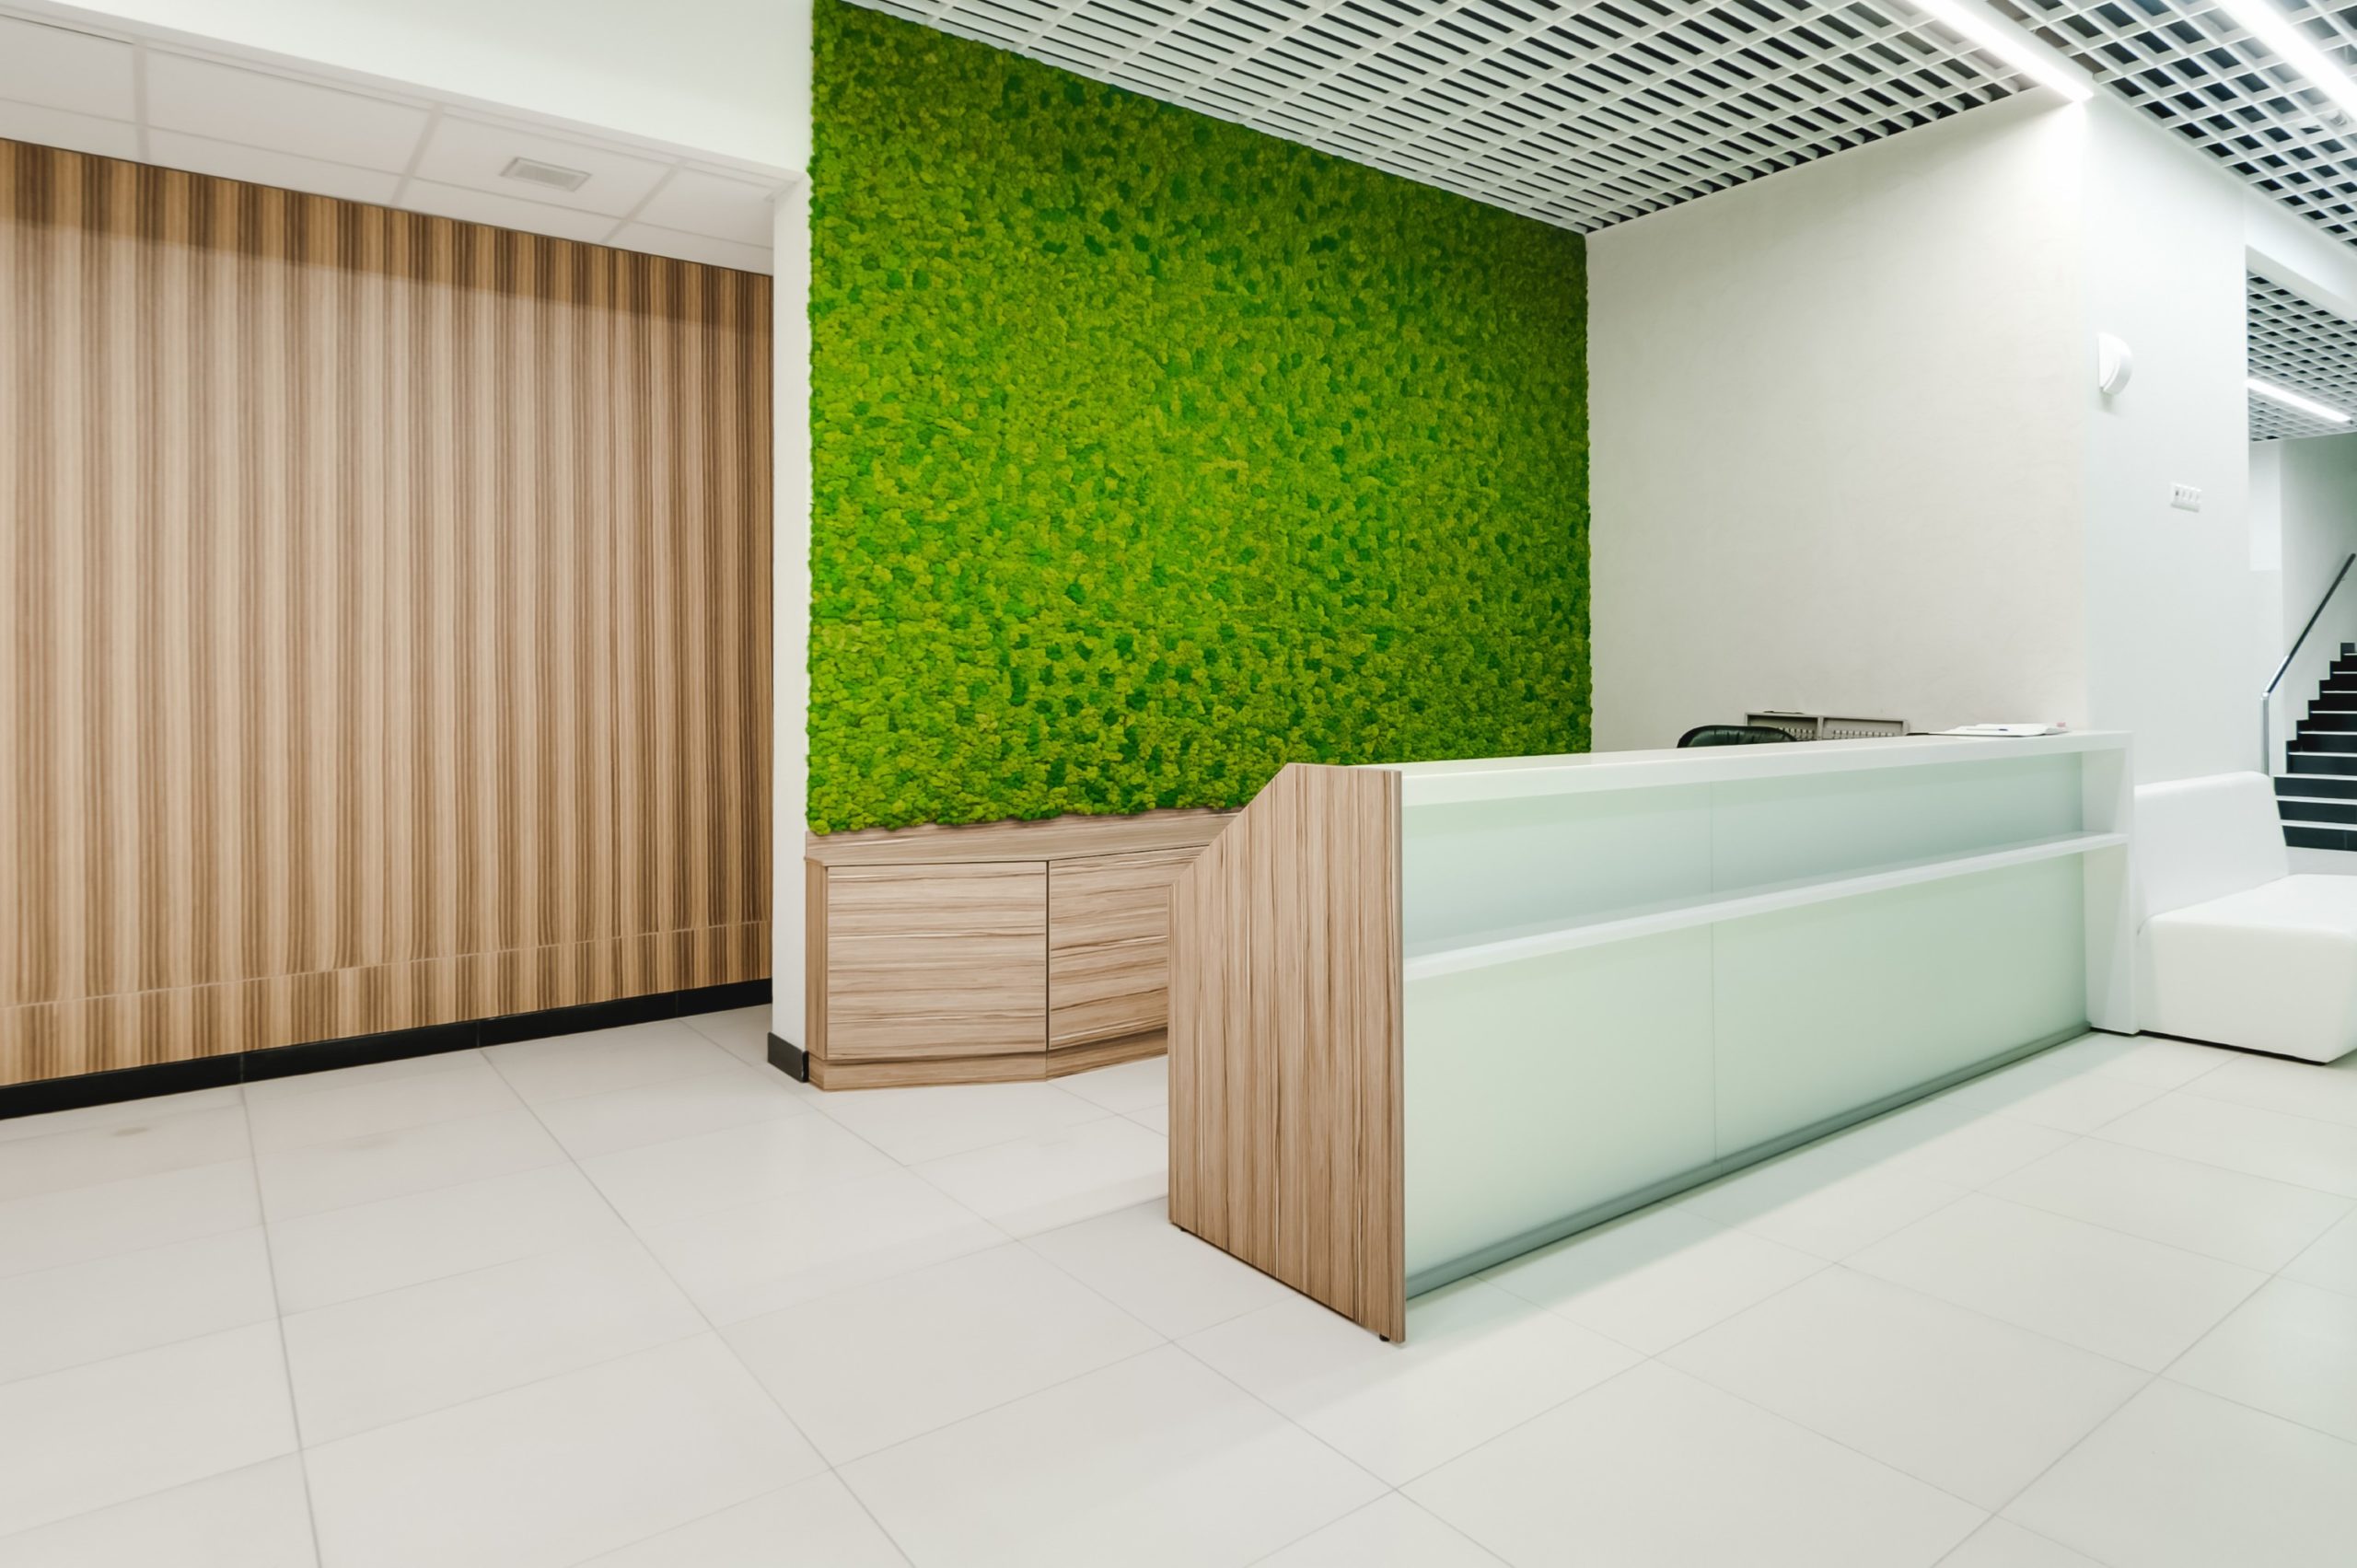 Russia, Novosibirsk - August 16, 2018: decorative moss for interior decoration. office style, interior design elements